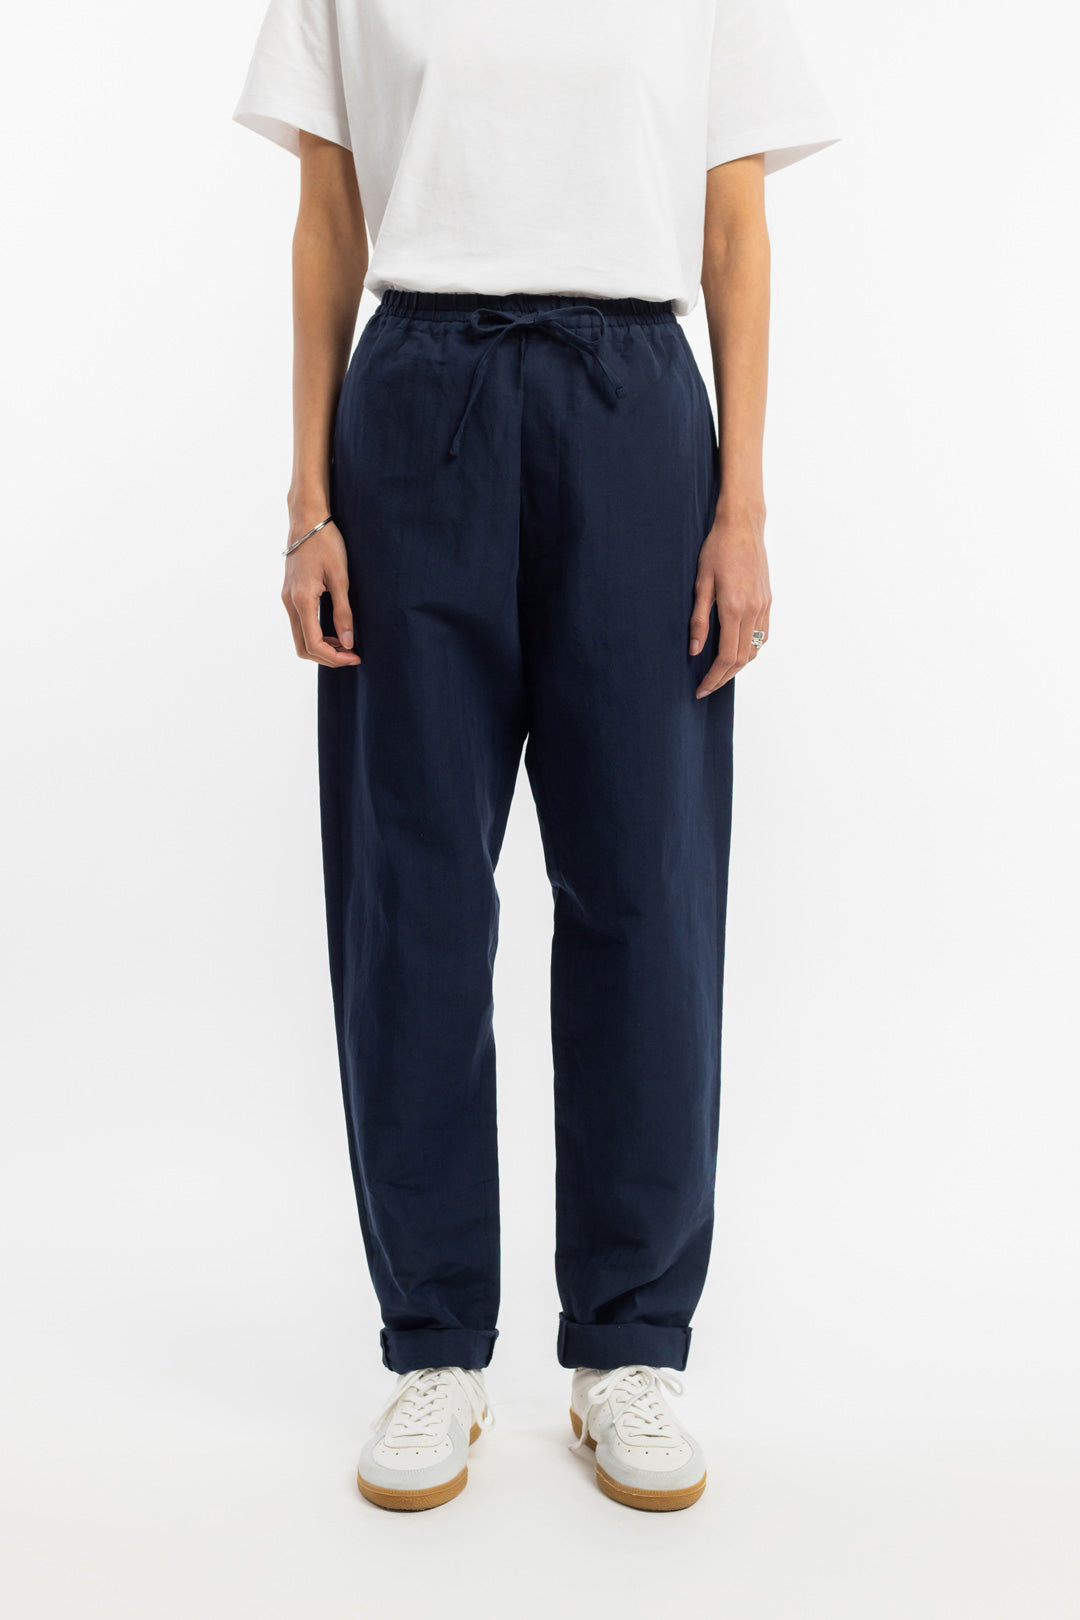 Dark blue trousers made of organic cotton &amp; linen by Rotholz